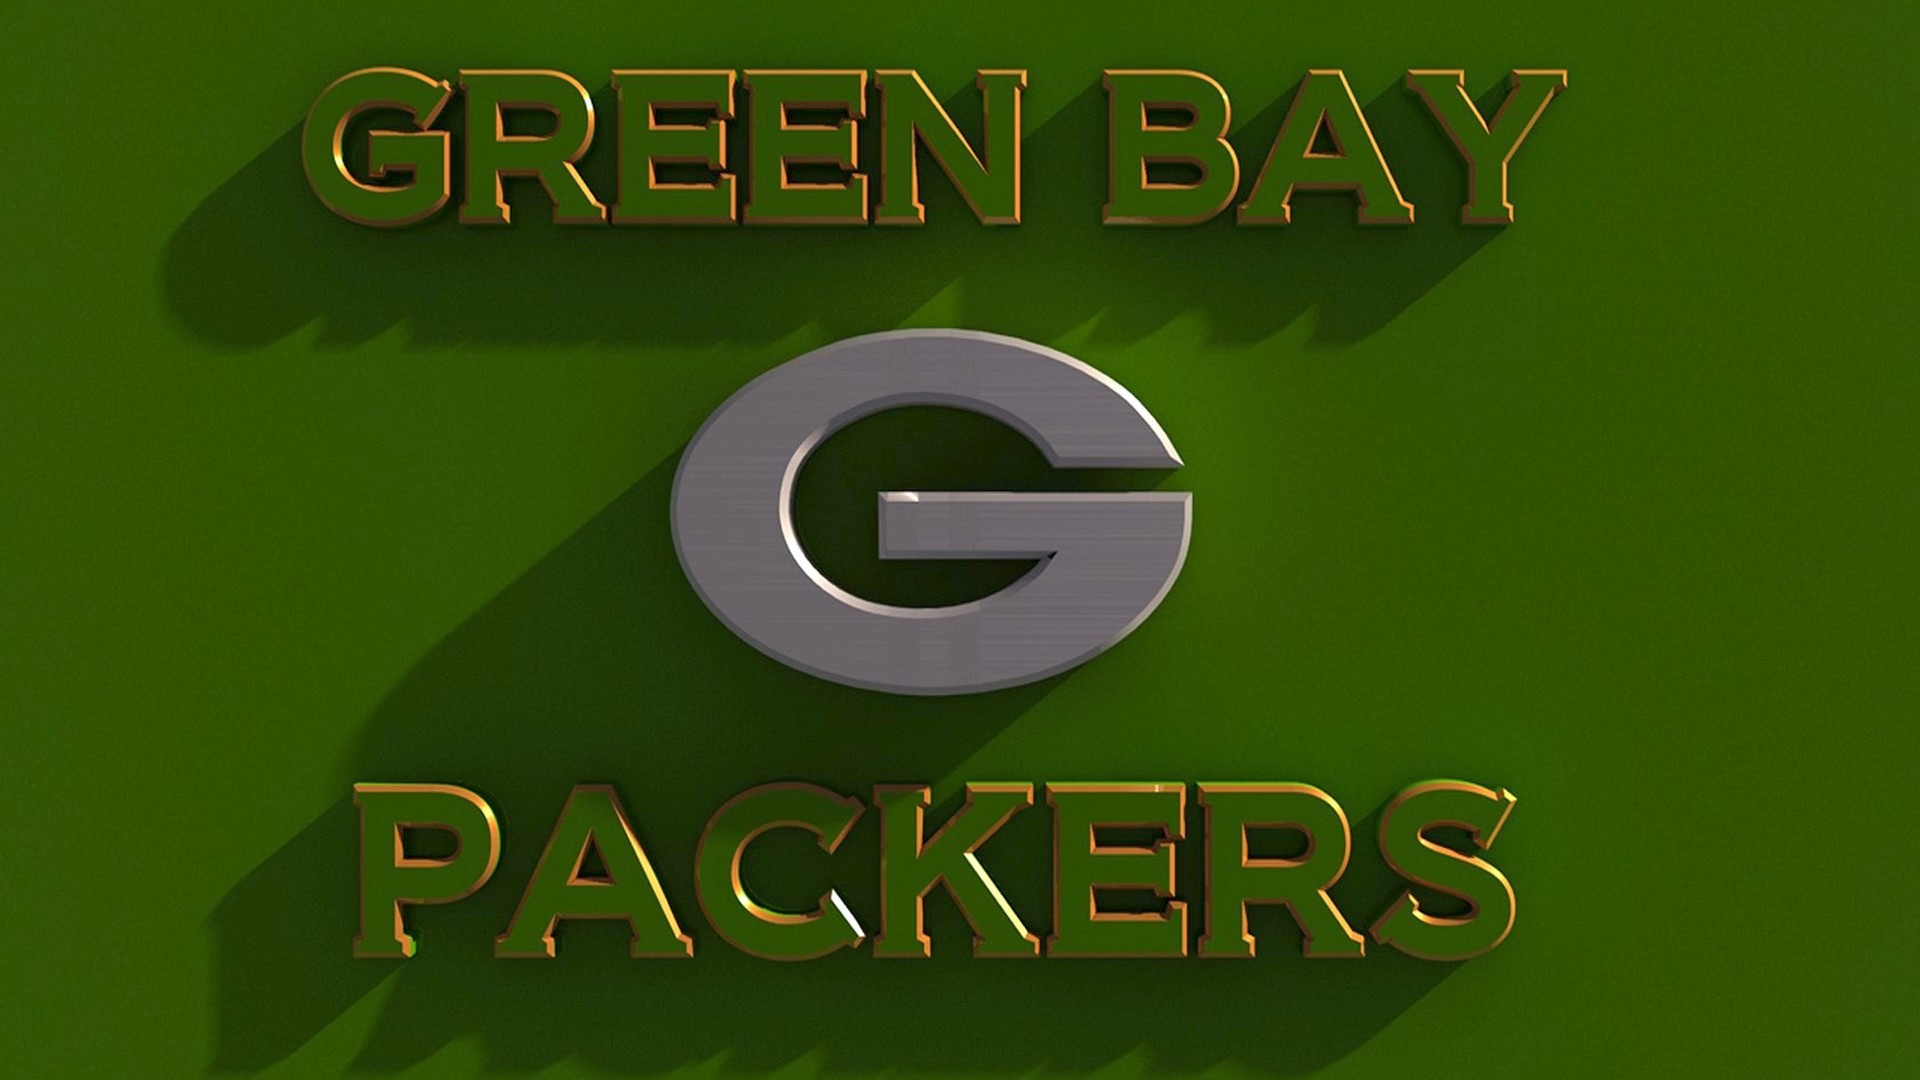 Wallpaper Desktop Green Bay Packers Logo HD With high-resolution 1920X1080 pixel. You can use this wallpaper for your Mac or Windows Desktop Background, iPhone, Android or Tablet and another Smartphone device